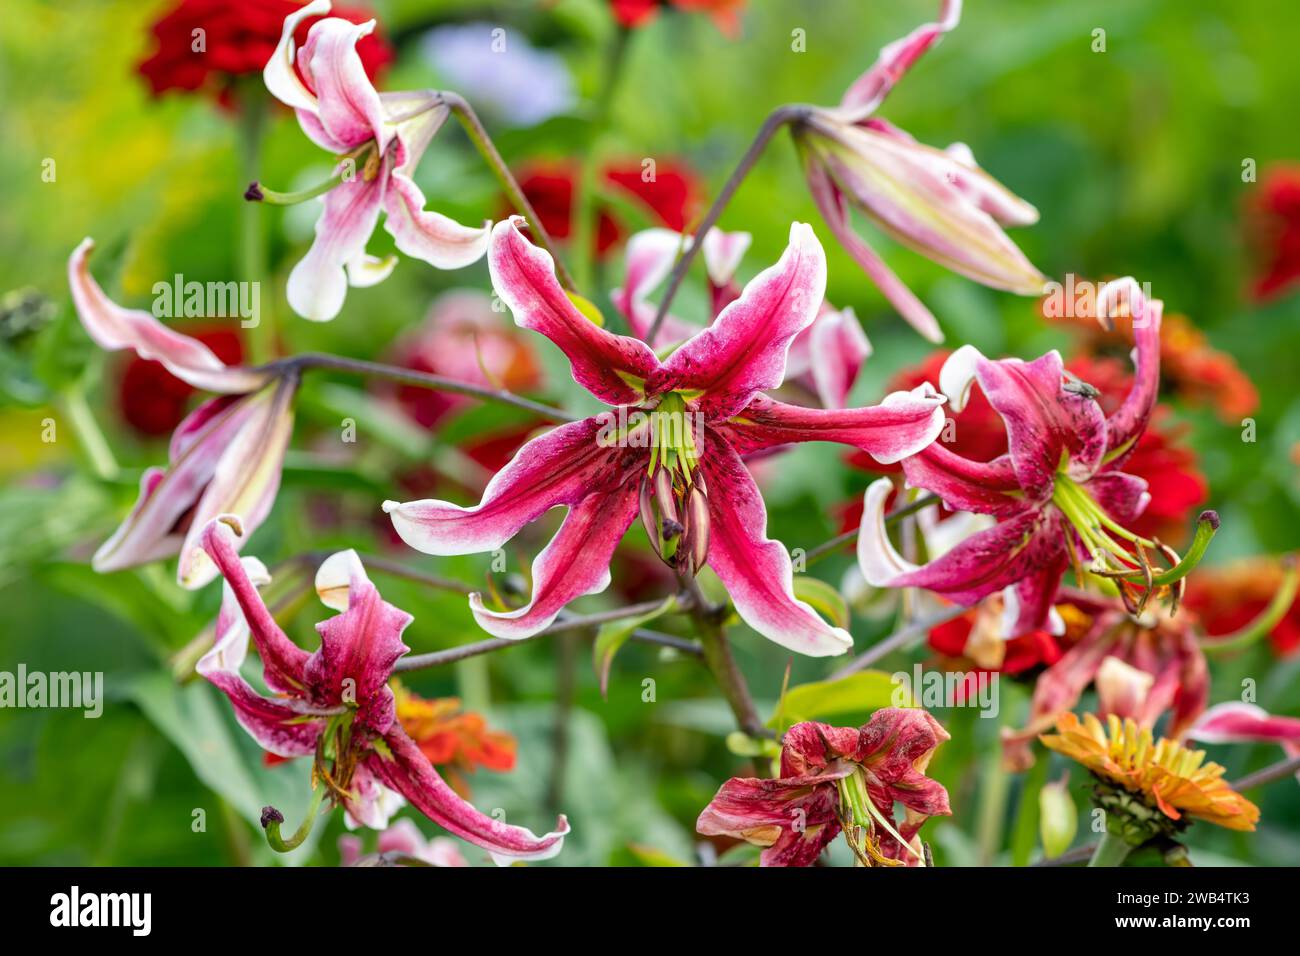 Close up of Japanese lilies (lilium speciosum) flowers in bloom Stock Photo